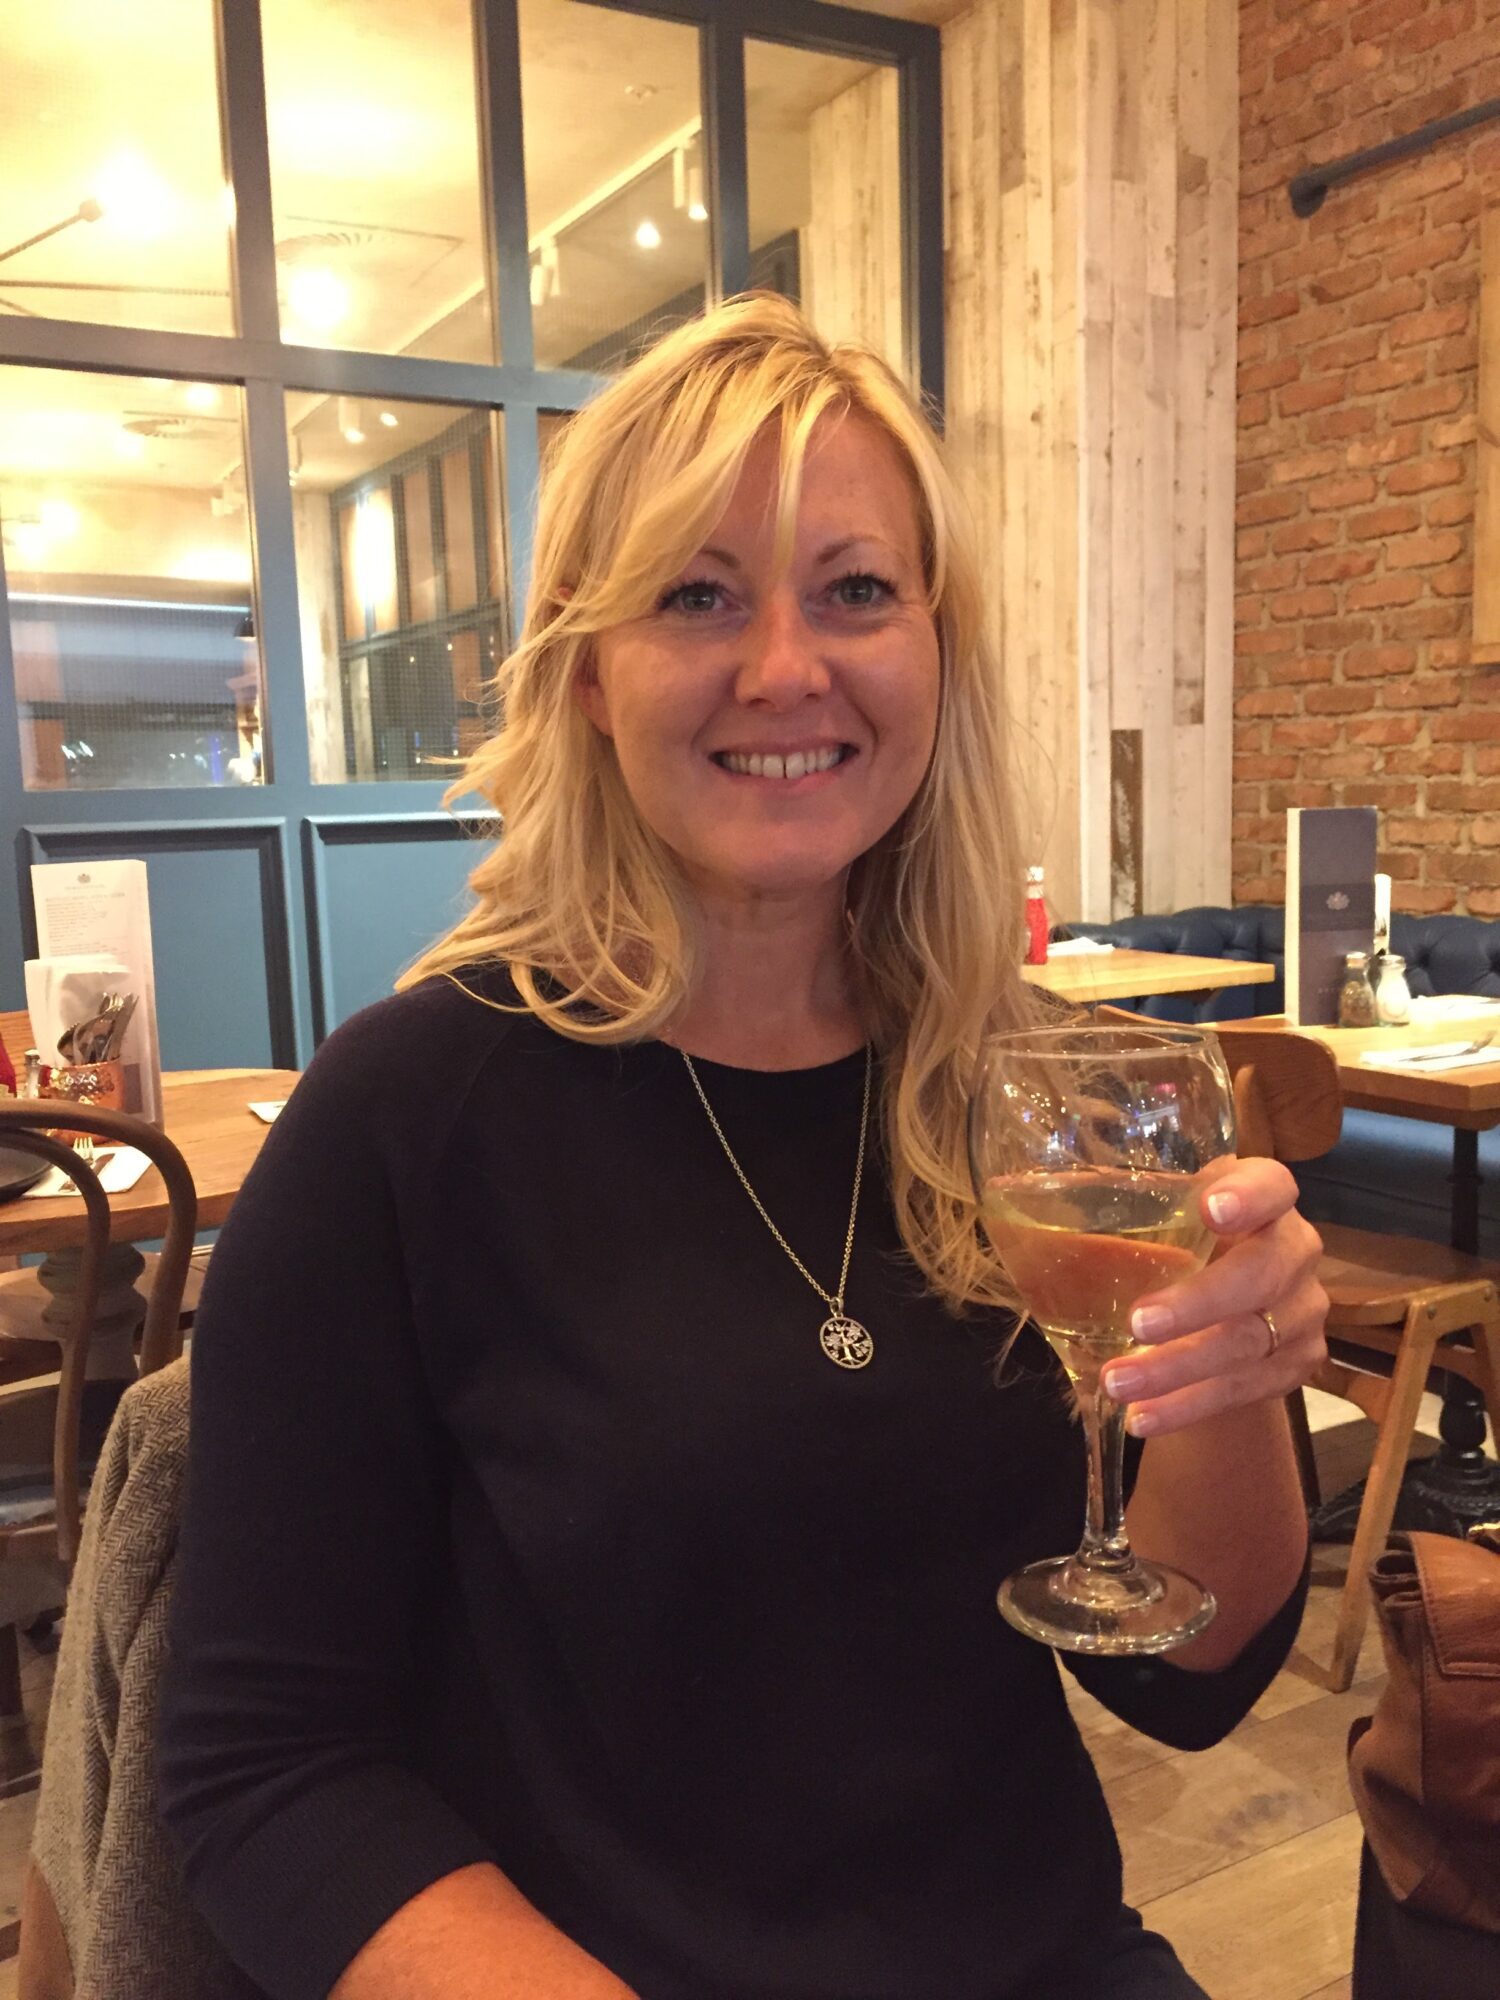 Rowcroft patient Jane Lloyd holding a glass of wine in a restaurant.